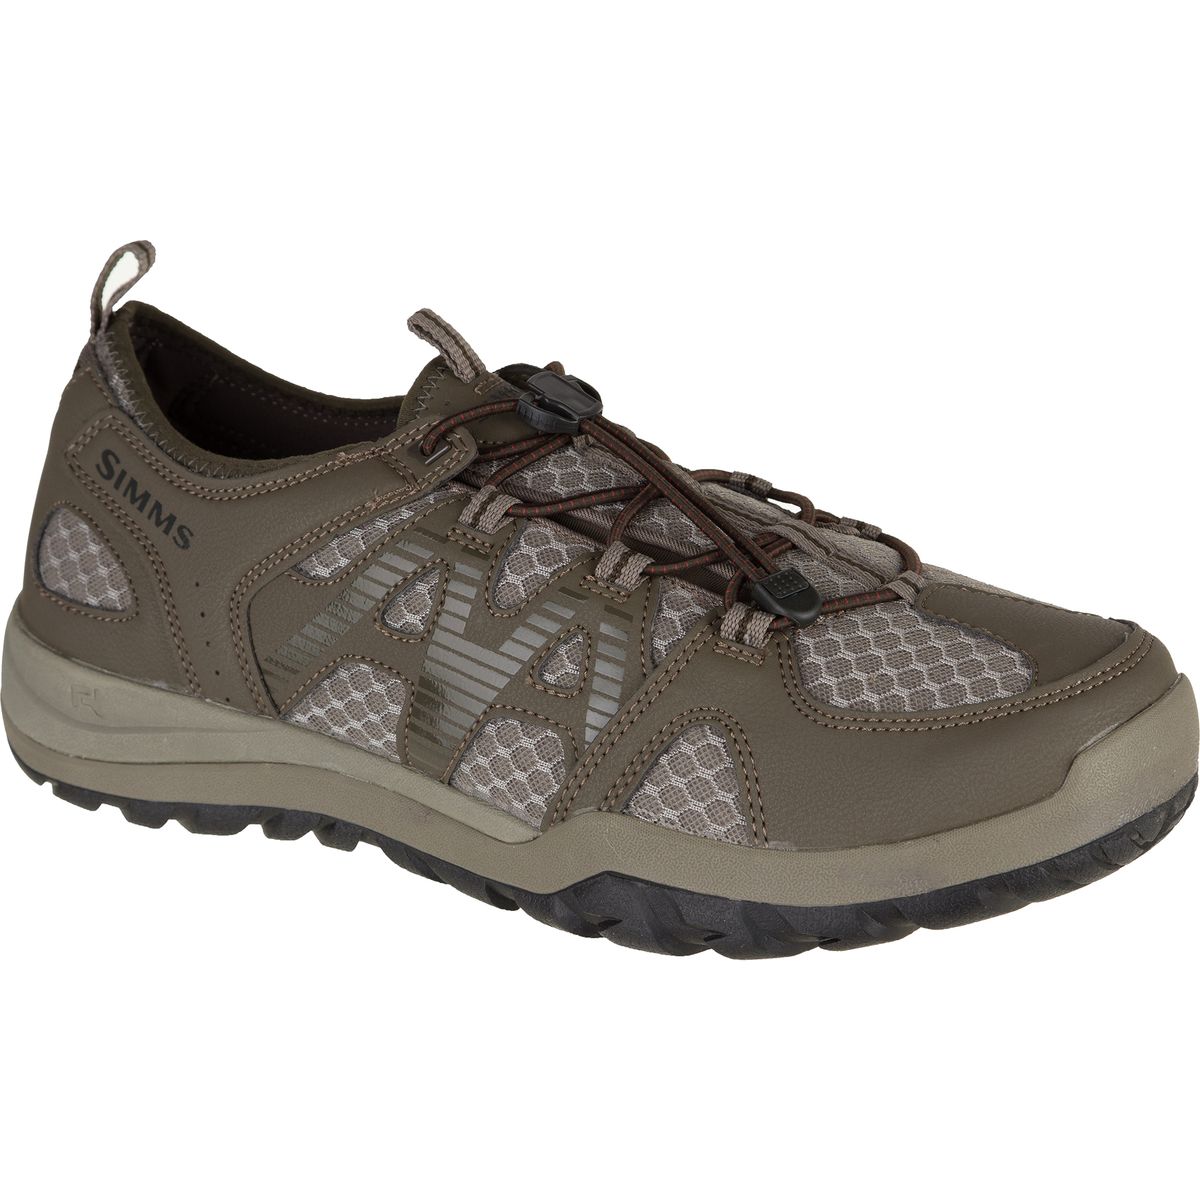 Simms Rippap Hickory Shoe